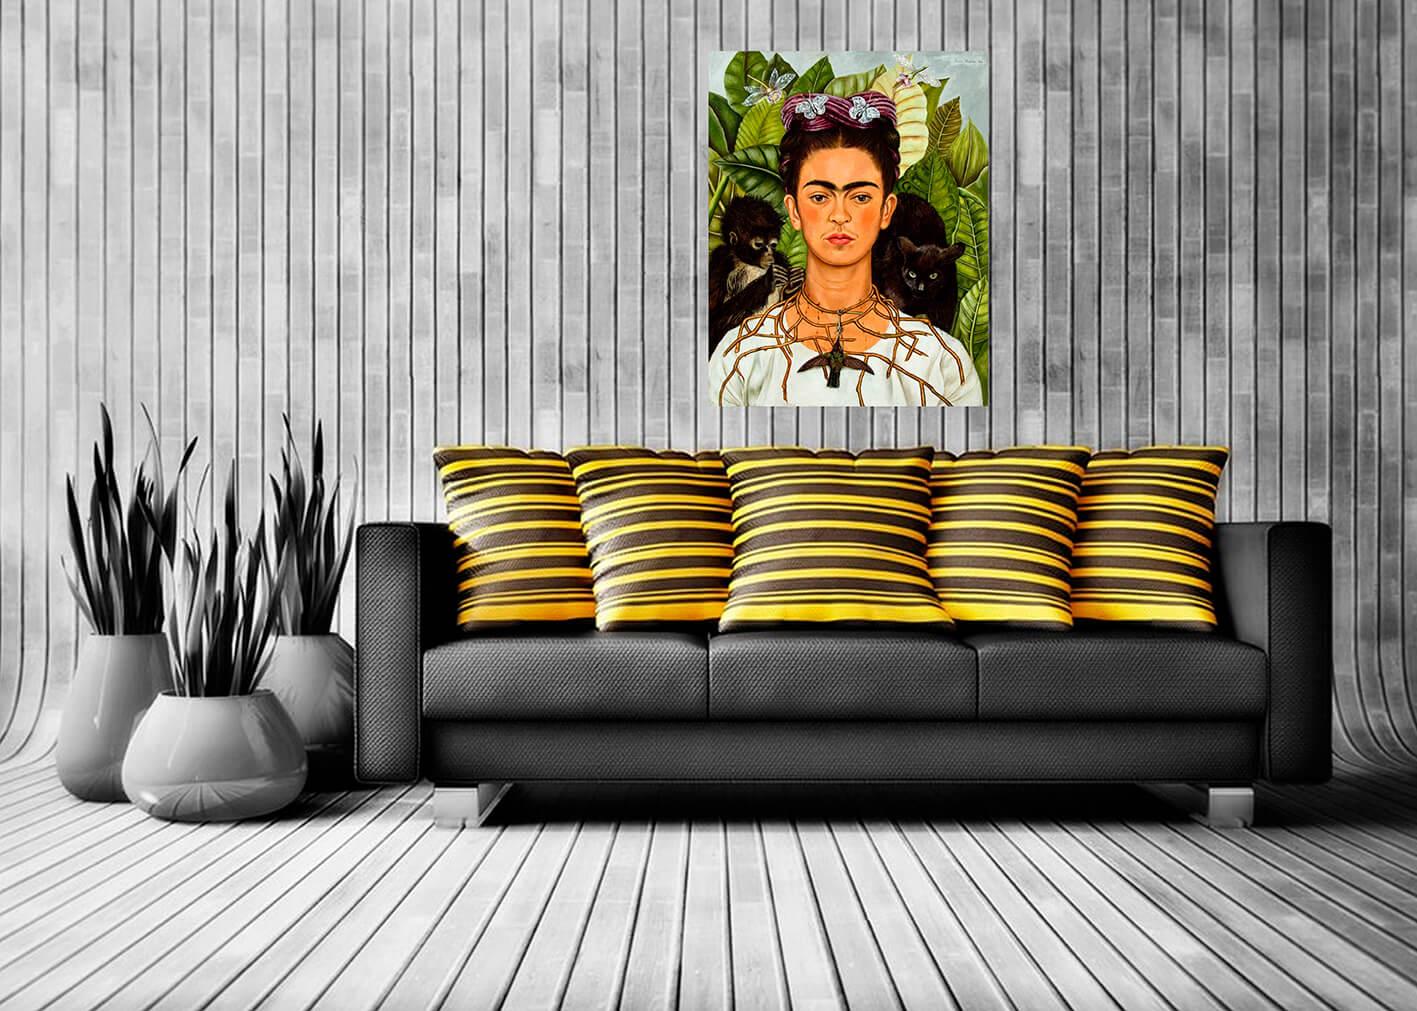 Picture Frida Kahlo - Self Portrait with Thorn Necklace and Hummingbird 3